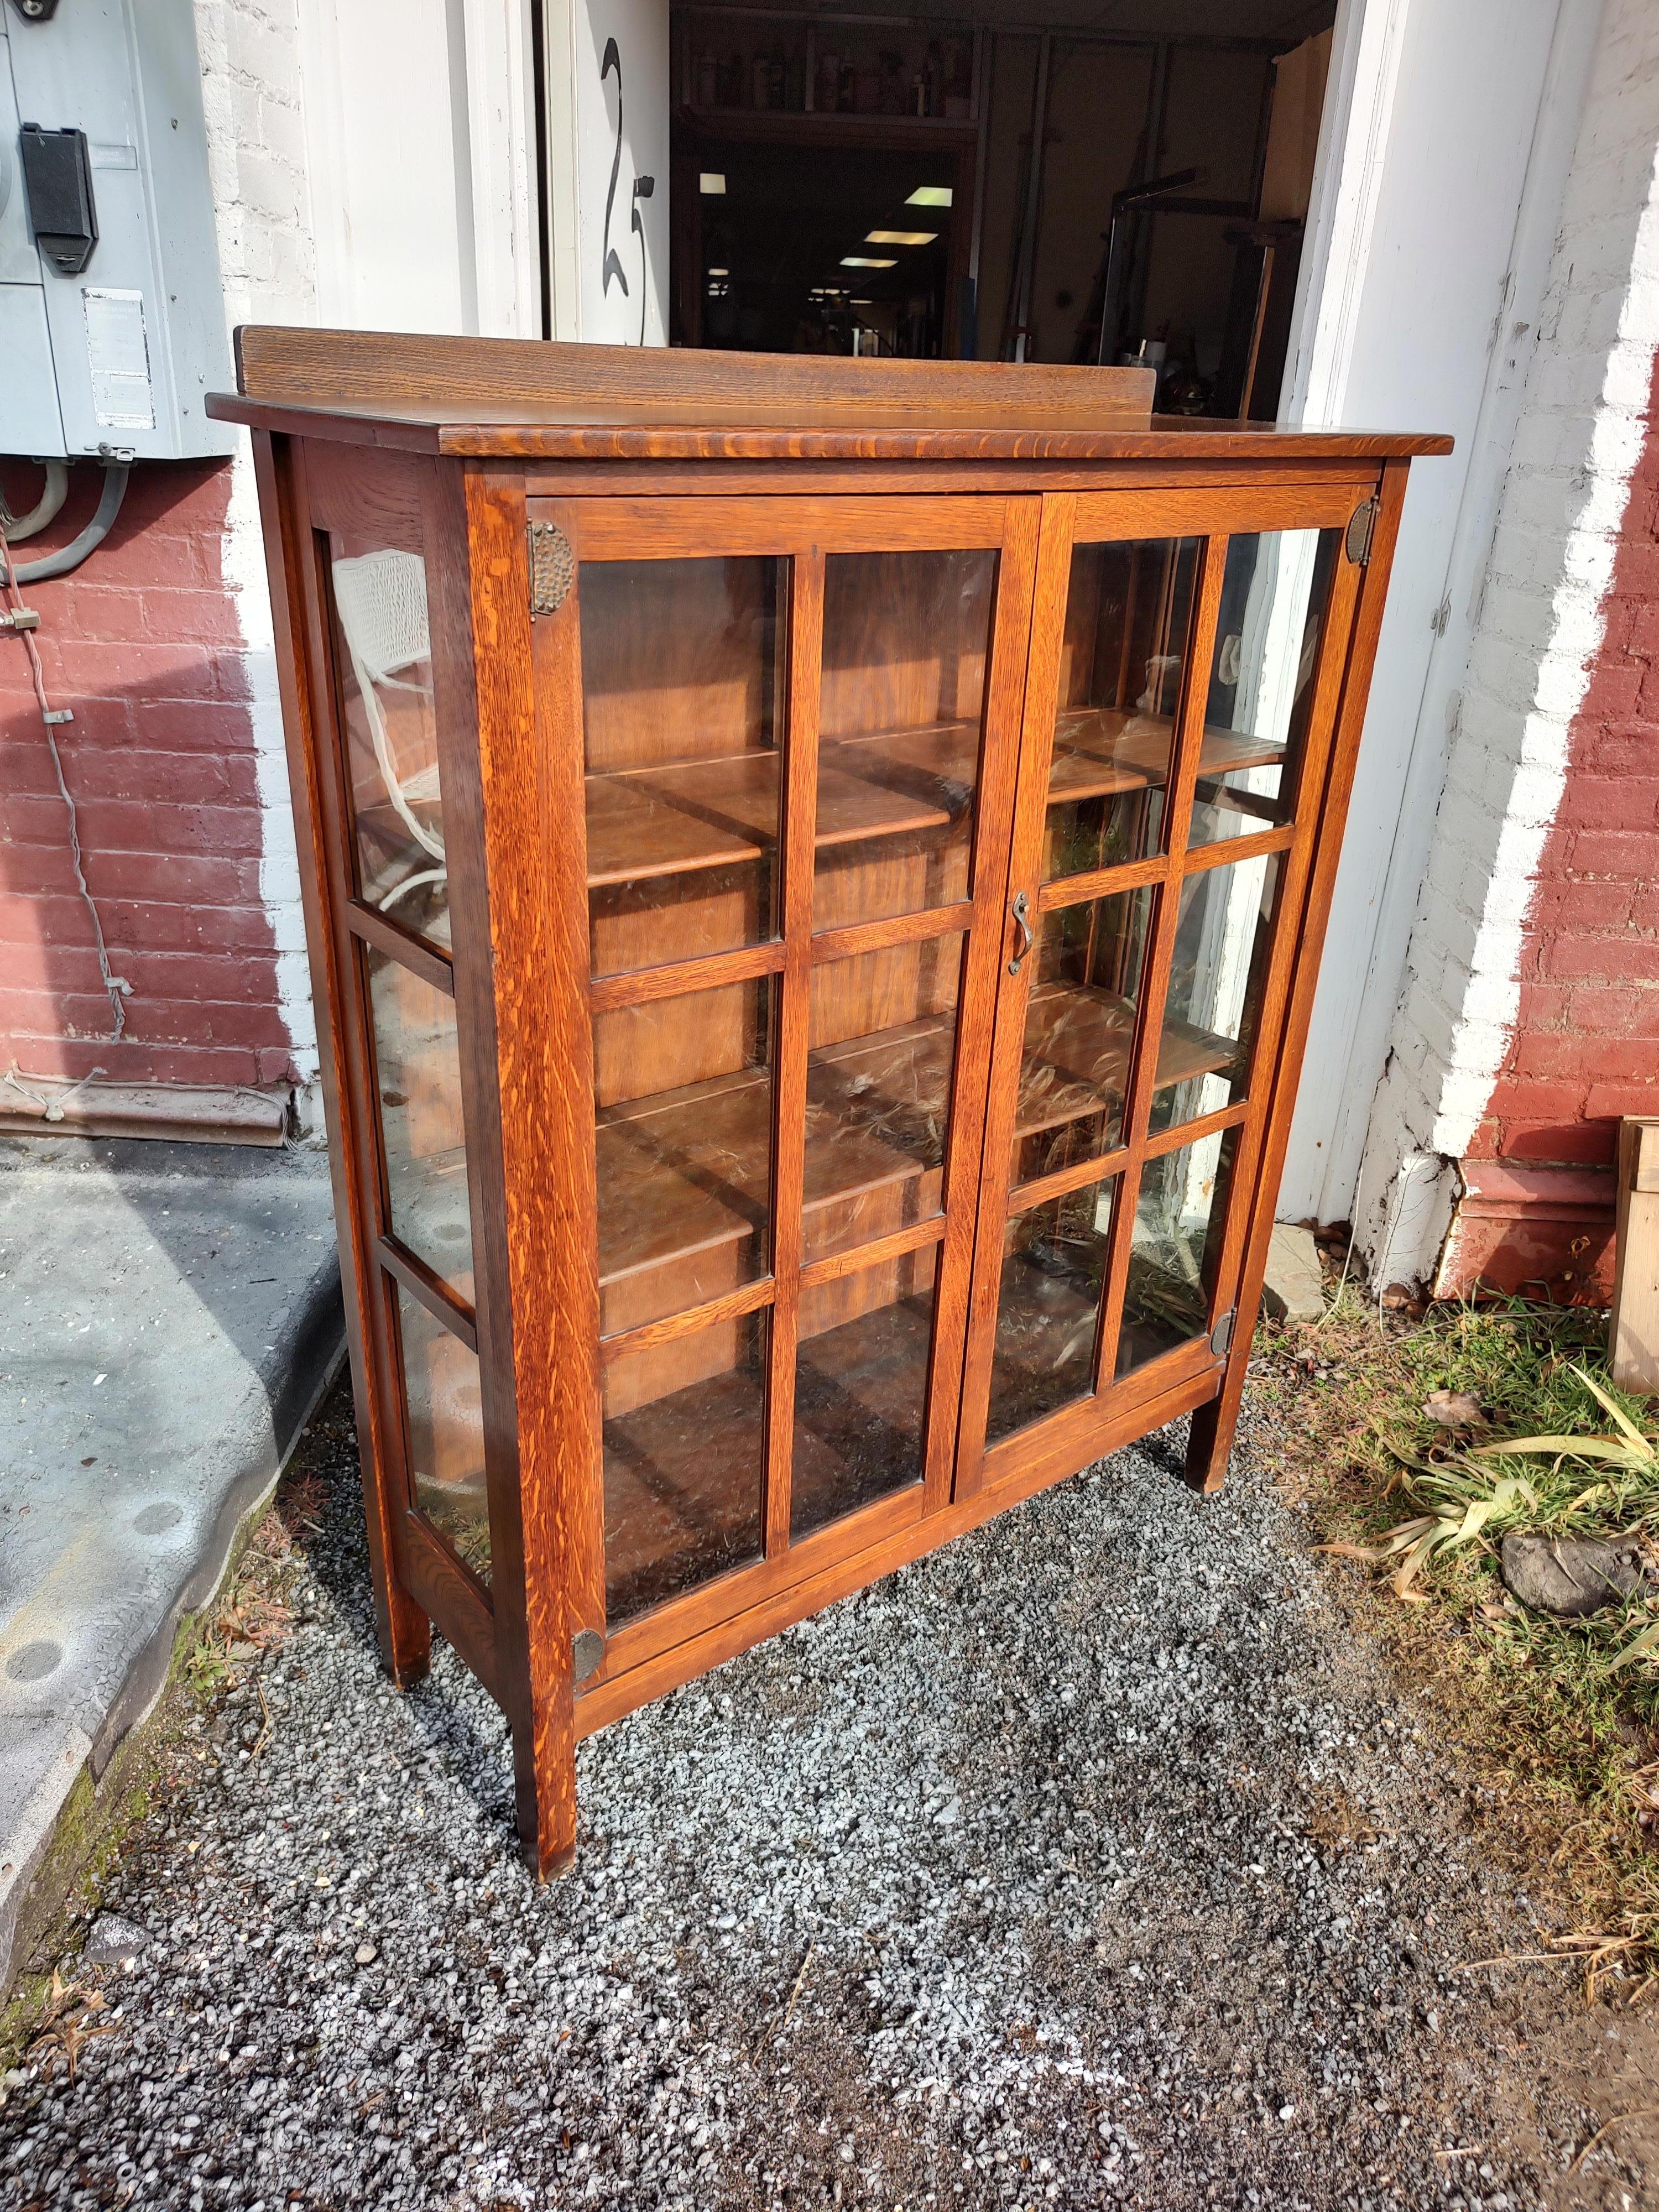 North American Arts & Crafts Oak Mission Bookcase/ China Cabinet by Stickley Brothers C1910